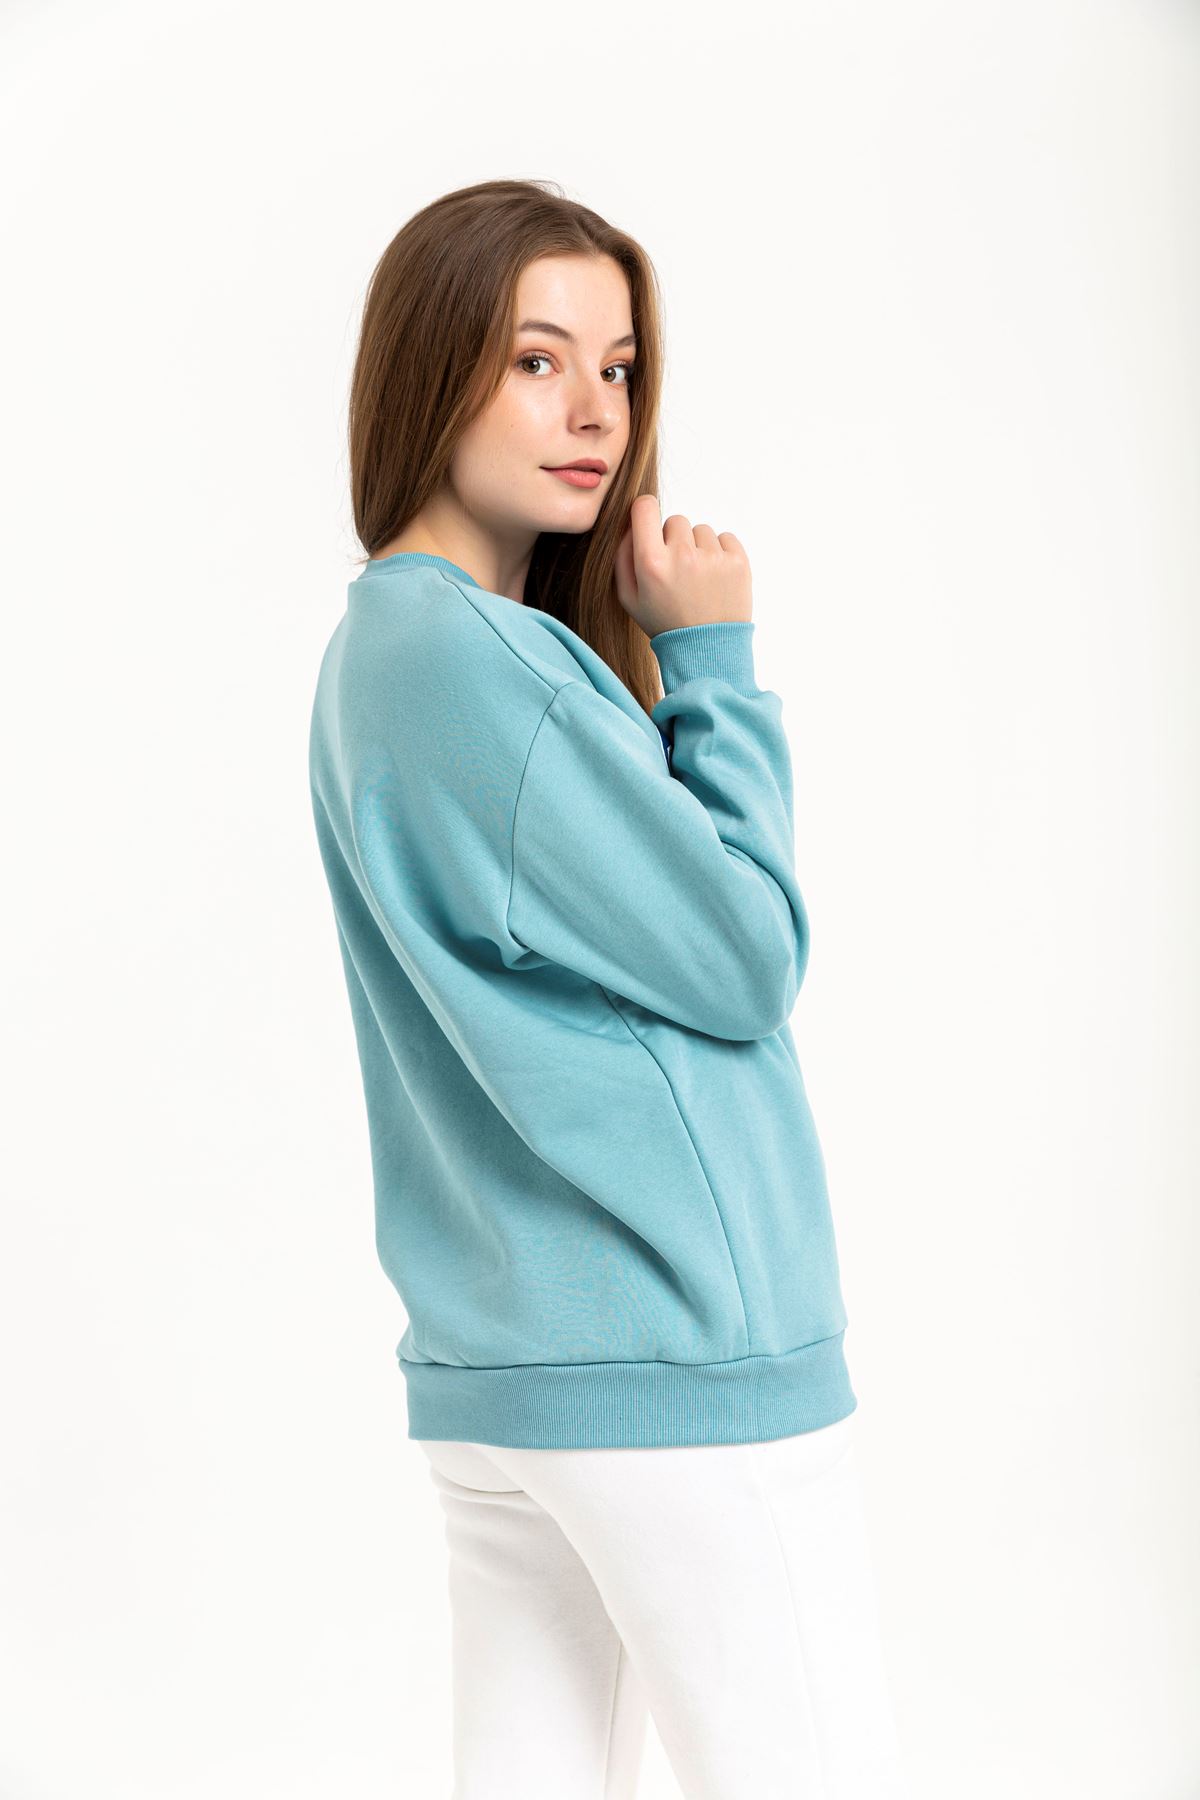 Third Knit With Wool İnside Fabric Hip Height Inscribed Women Sweatshirt - Blue